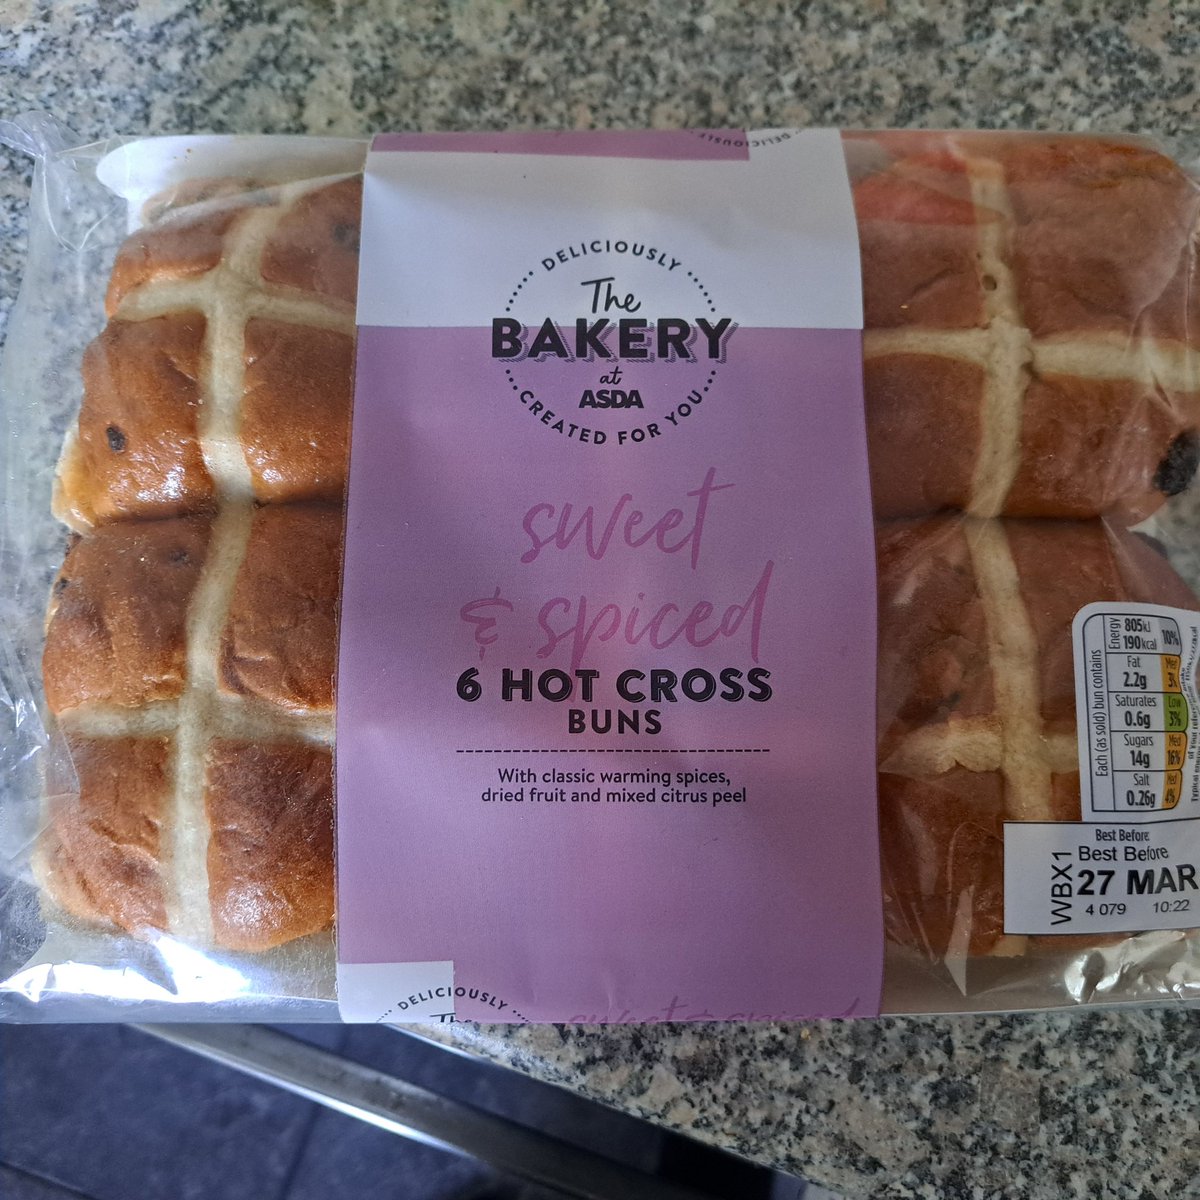 For anyone losing their collective shit that @asda have got rid of hot cross buns, here's some I bought earlier.  I'll be enjoying them later for iftar unless some loopy right wing nonce objects to a Muslim guy biting into a cross
#HotCrossBuns #Asda